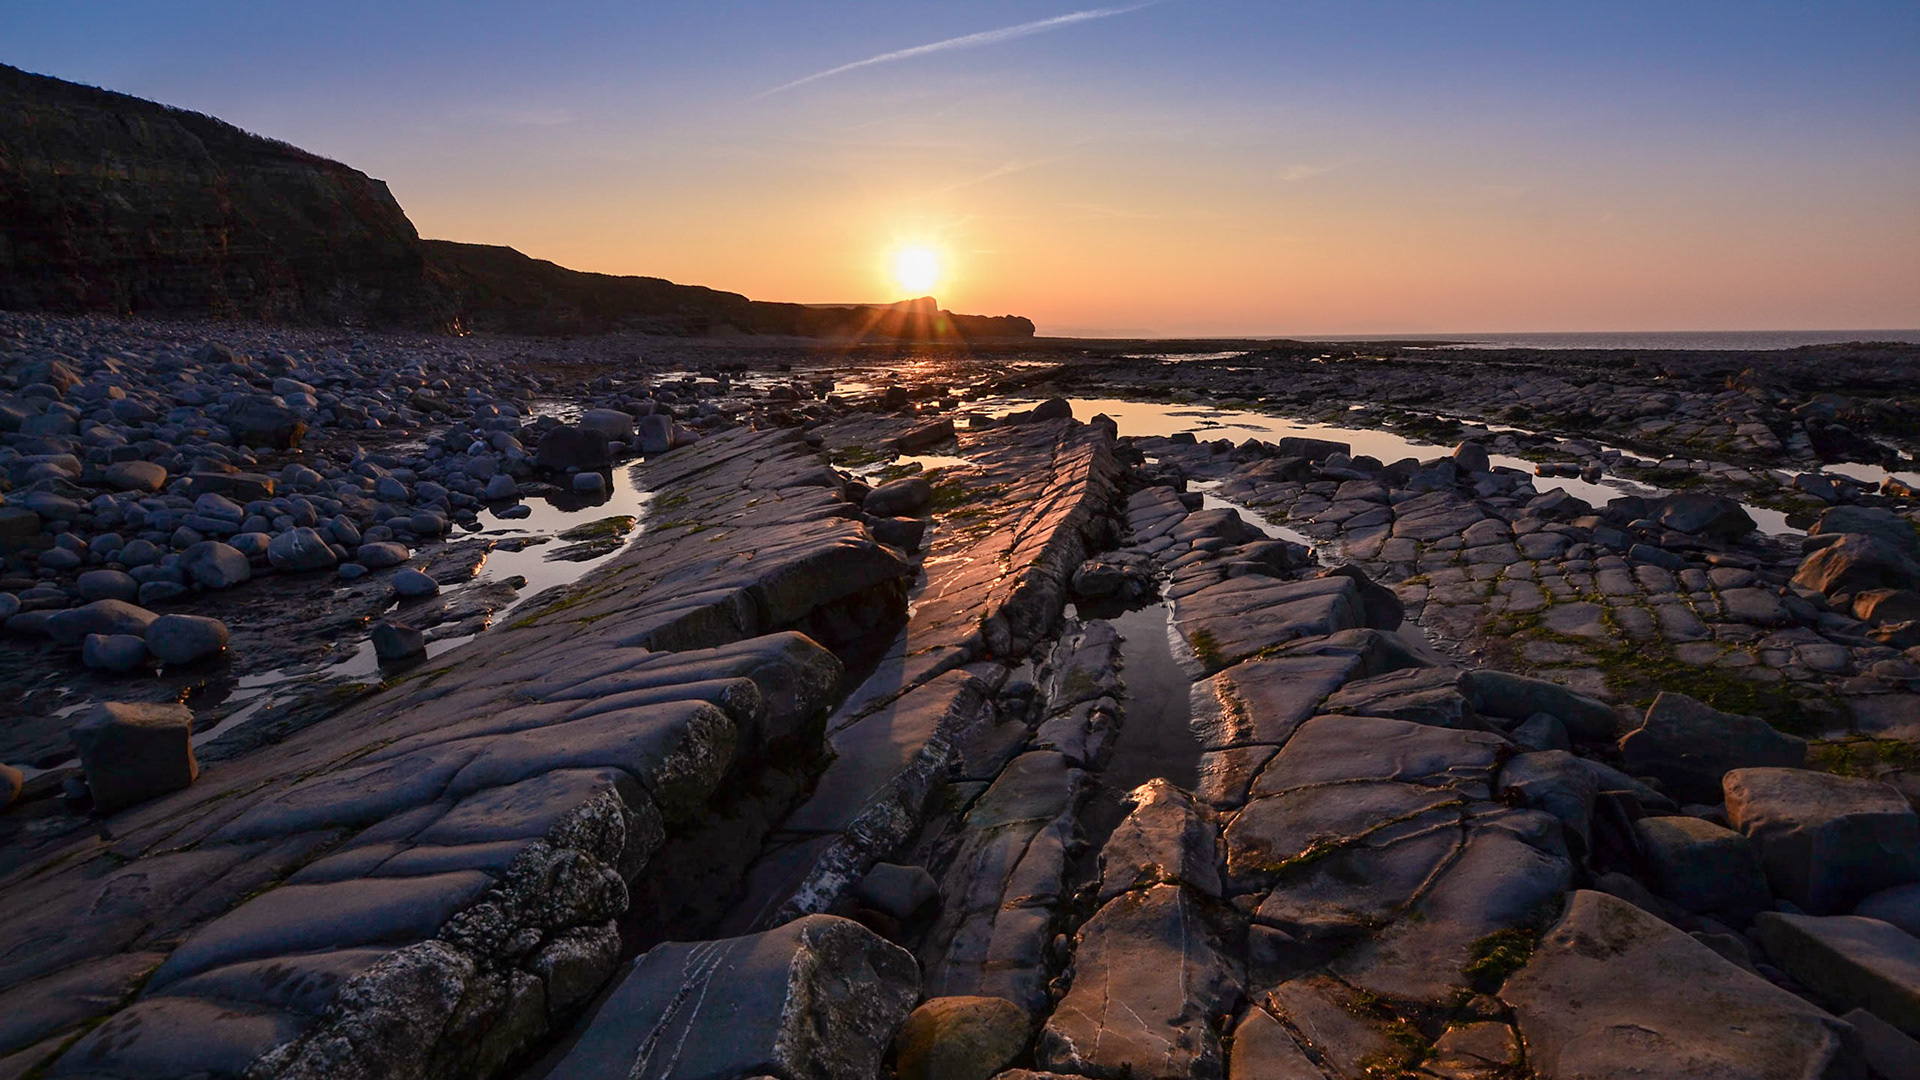 A summer sunset on Kilve beach at low tide shows rows of jagged rocks.